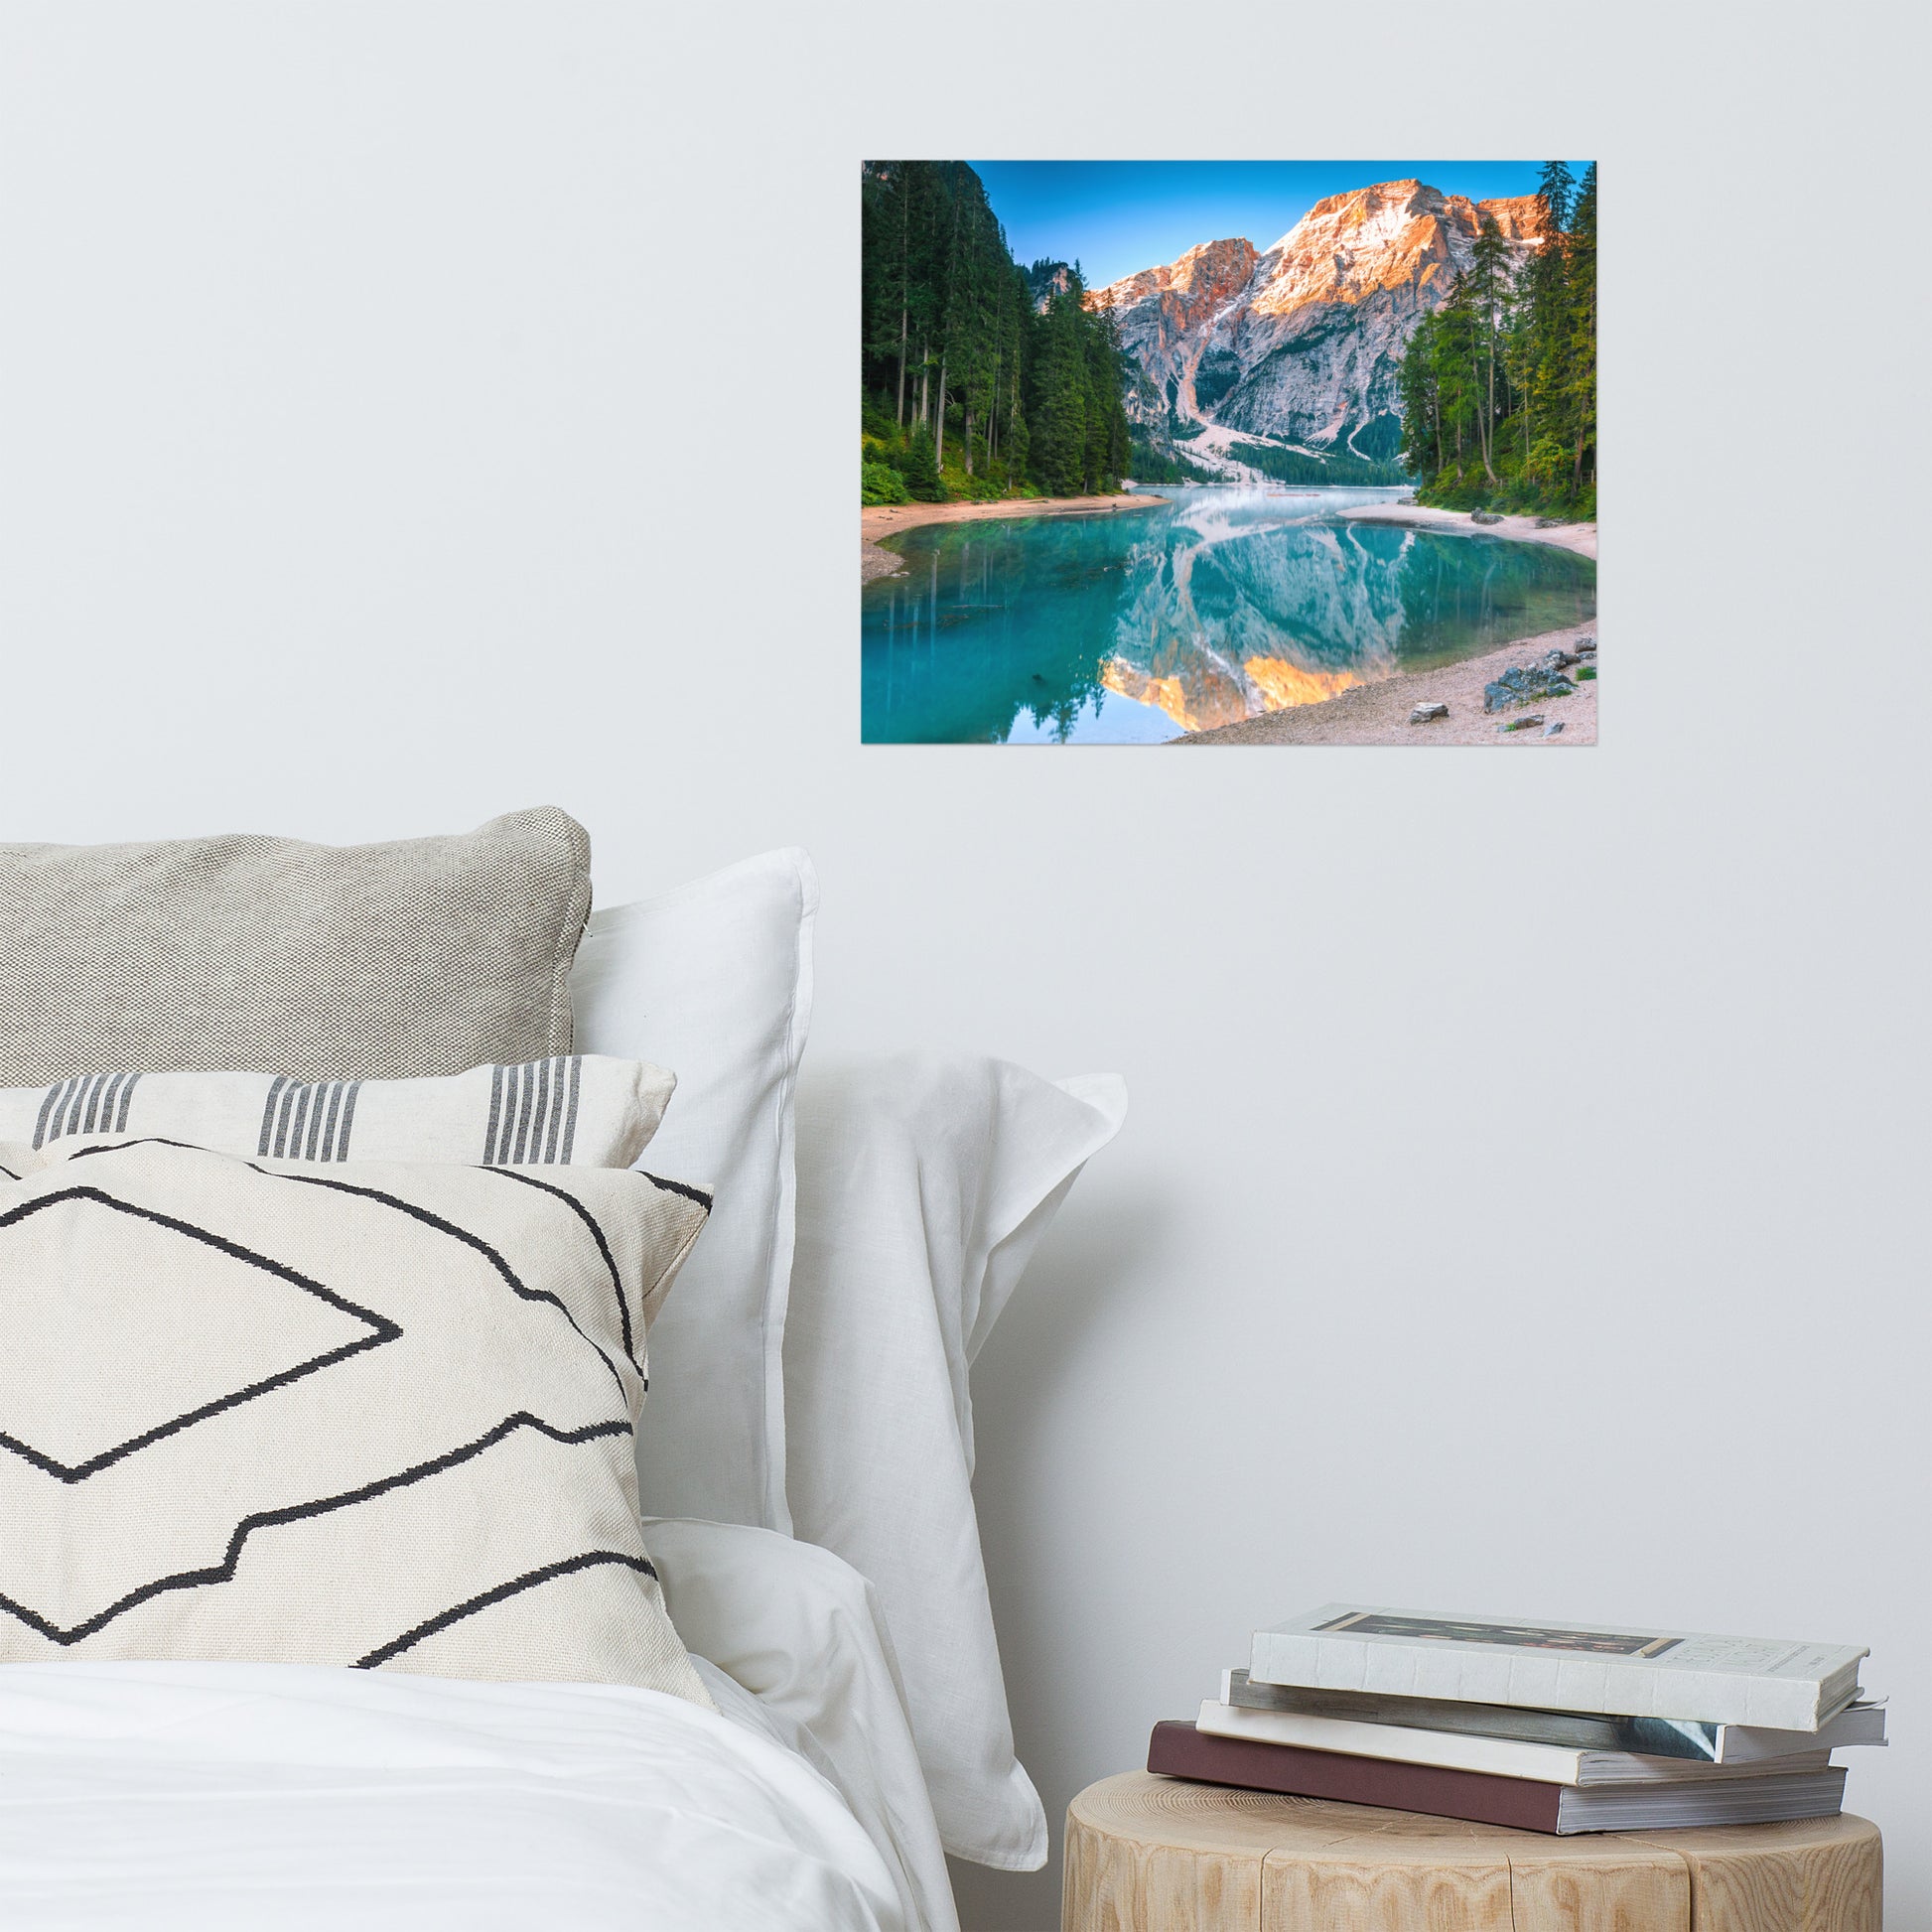 Rustic Log Cabin Wall Decor: Misty Lake and Snow-cap Mountain Reflections - Rural / Country Style / Rustic / Landscape / Nature Photograph Loose / Unframed Frameless / Frameable Wall Art Print - Artwork